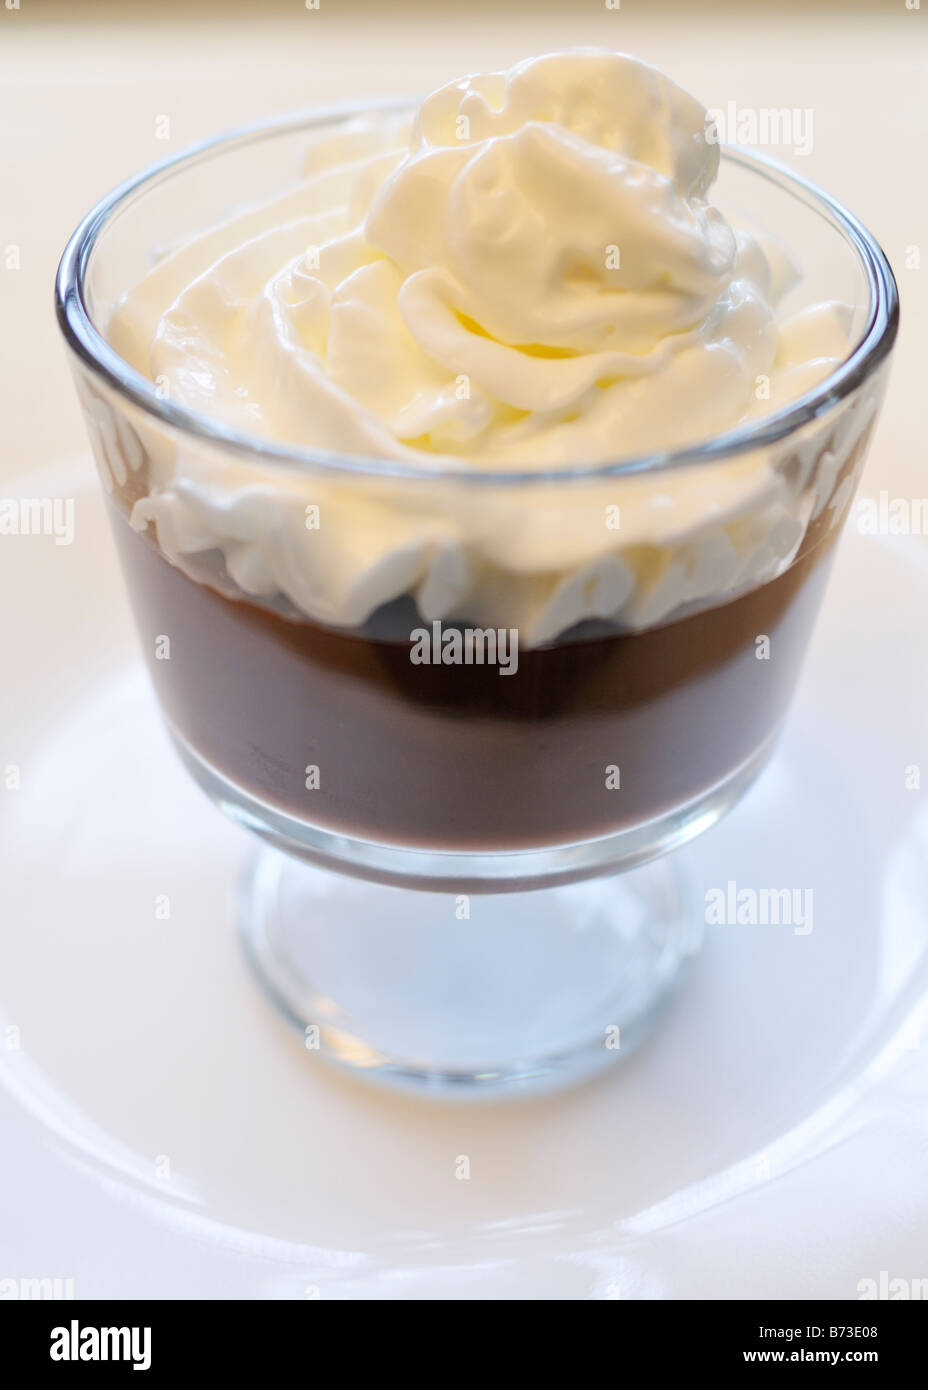 Chocolate pudding topped with whipped cream in a glass dessert bowl on white background. Stock Photo